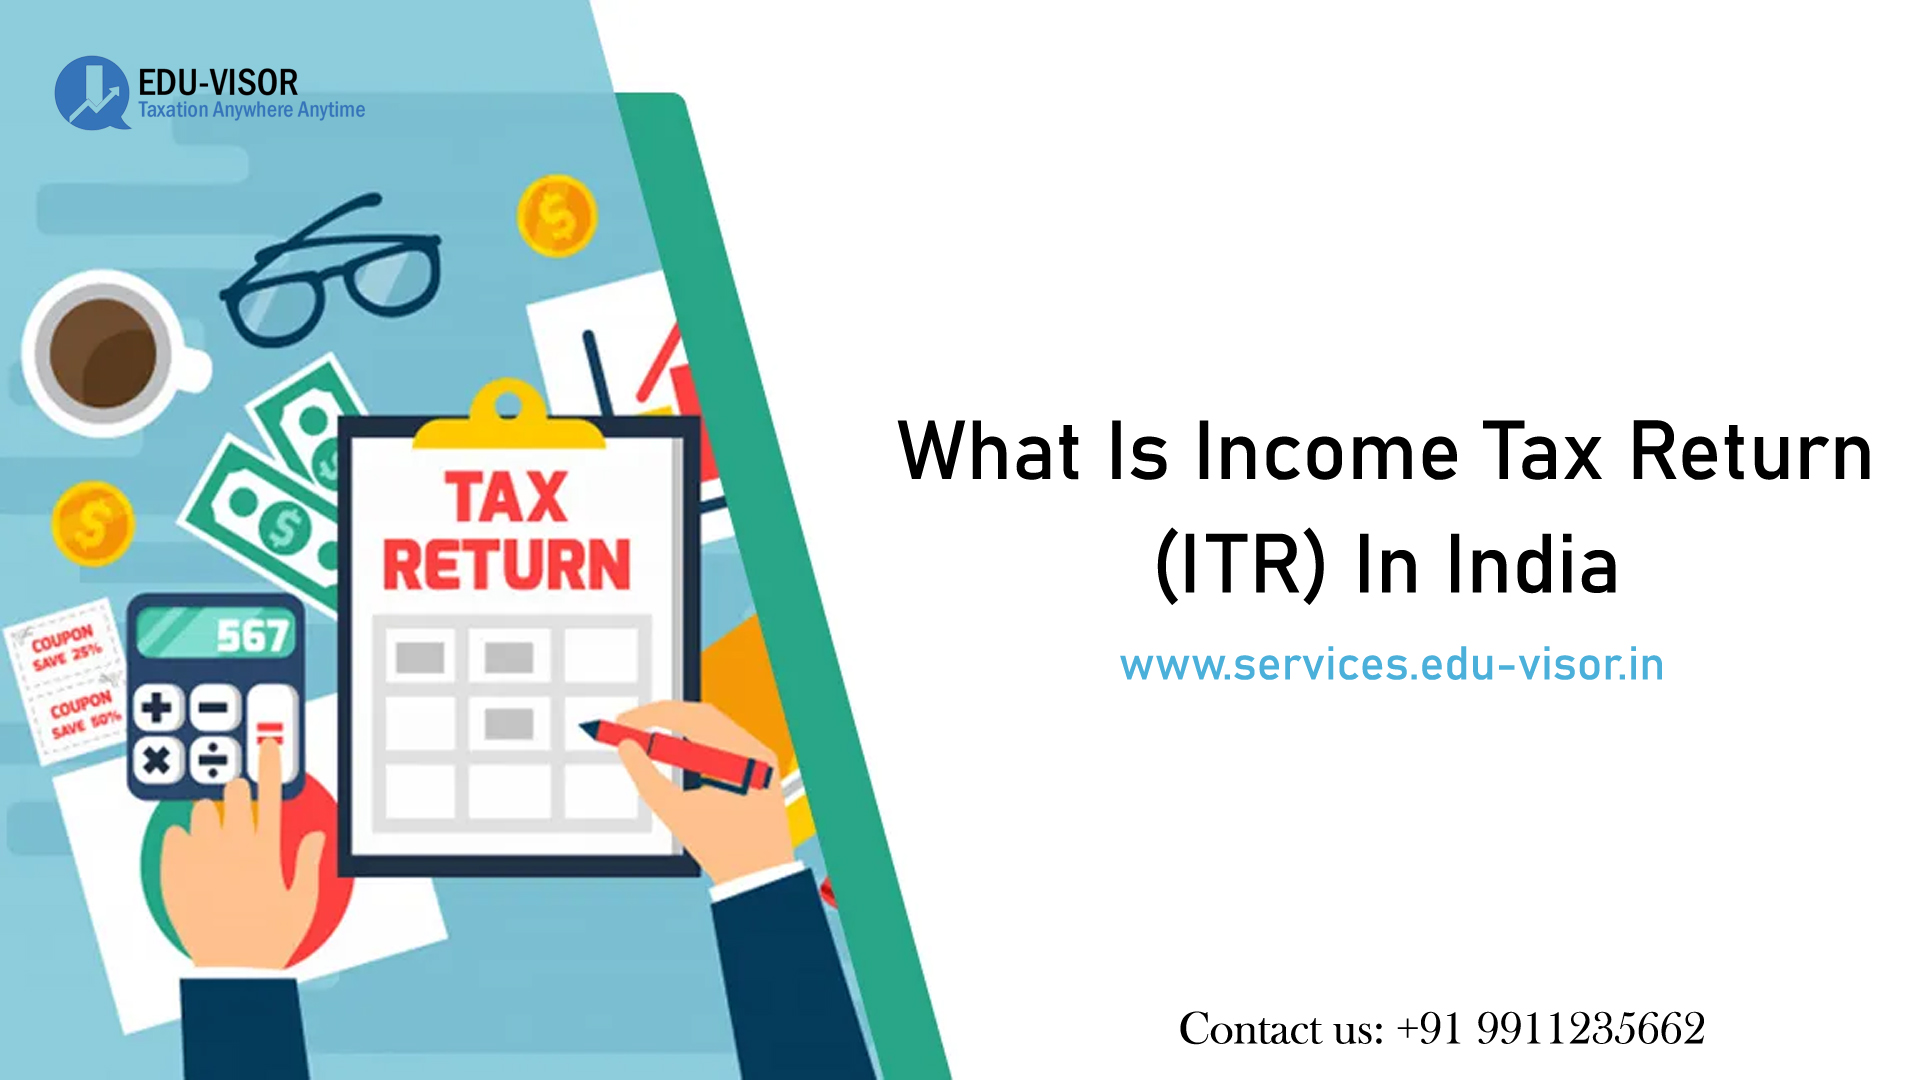 What Is Income Tax Return (ITR) In India